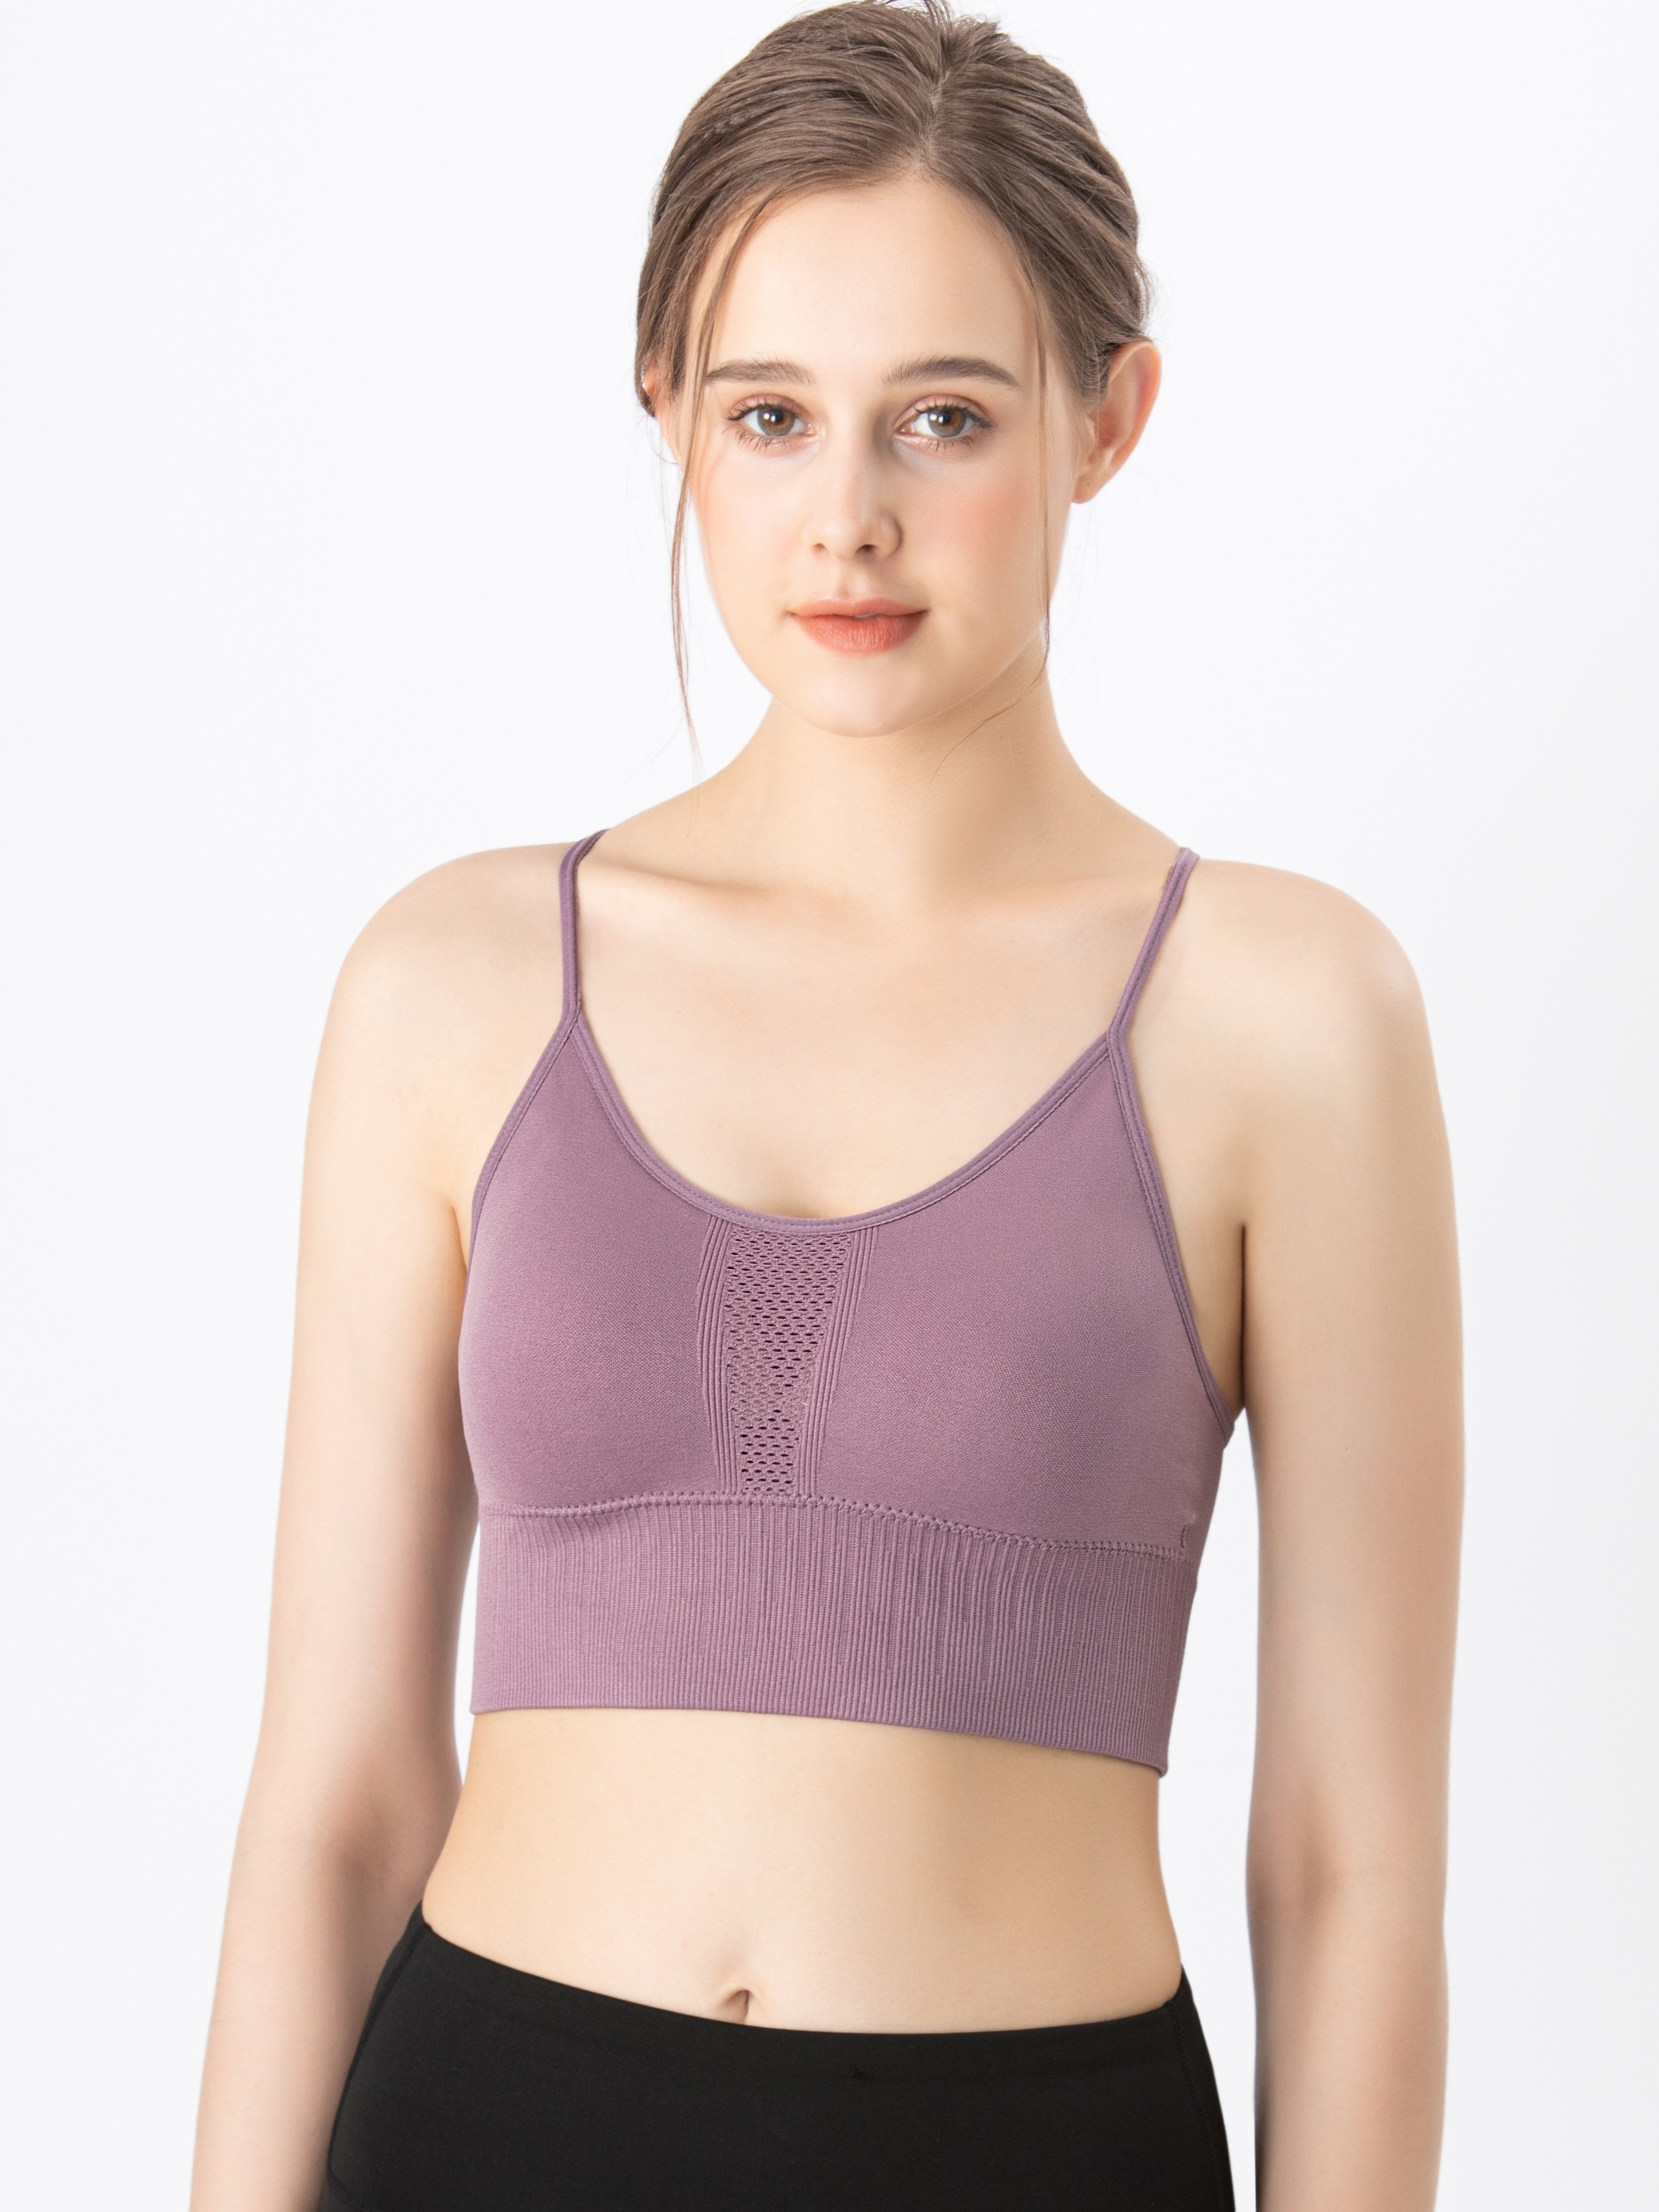 Women's Ultra Thin Sheer Bralette Bra Mesh See Though Wirefree Workout Yoga  Top